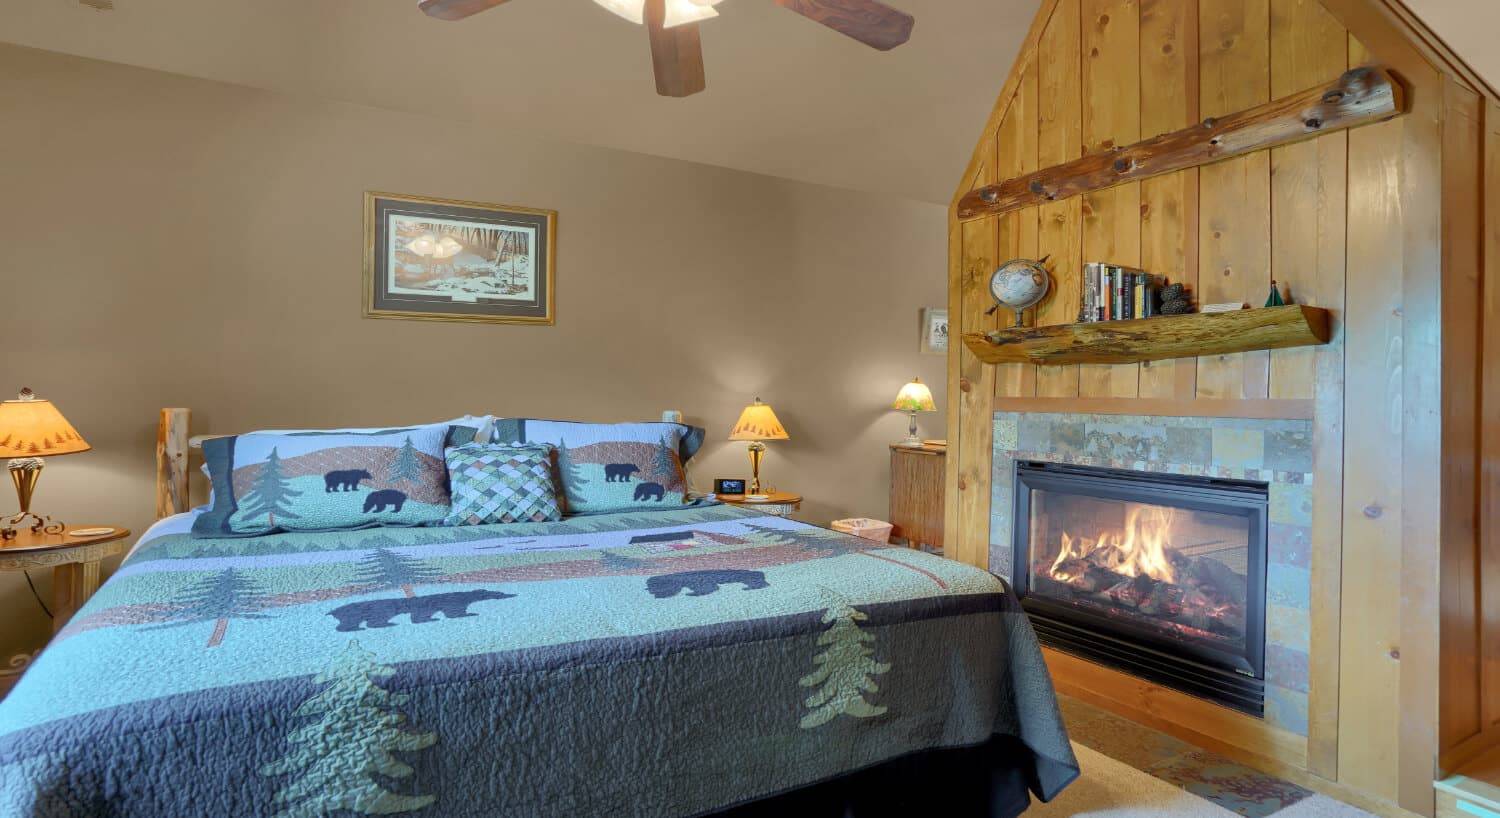 A king bed with a blue quilt with pine trees and bears, and a fireplace to one side.